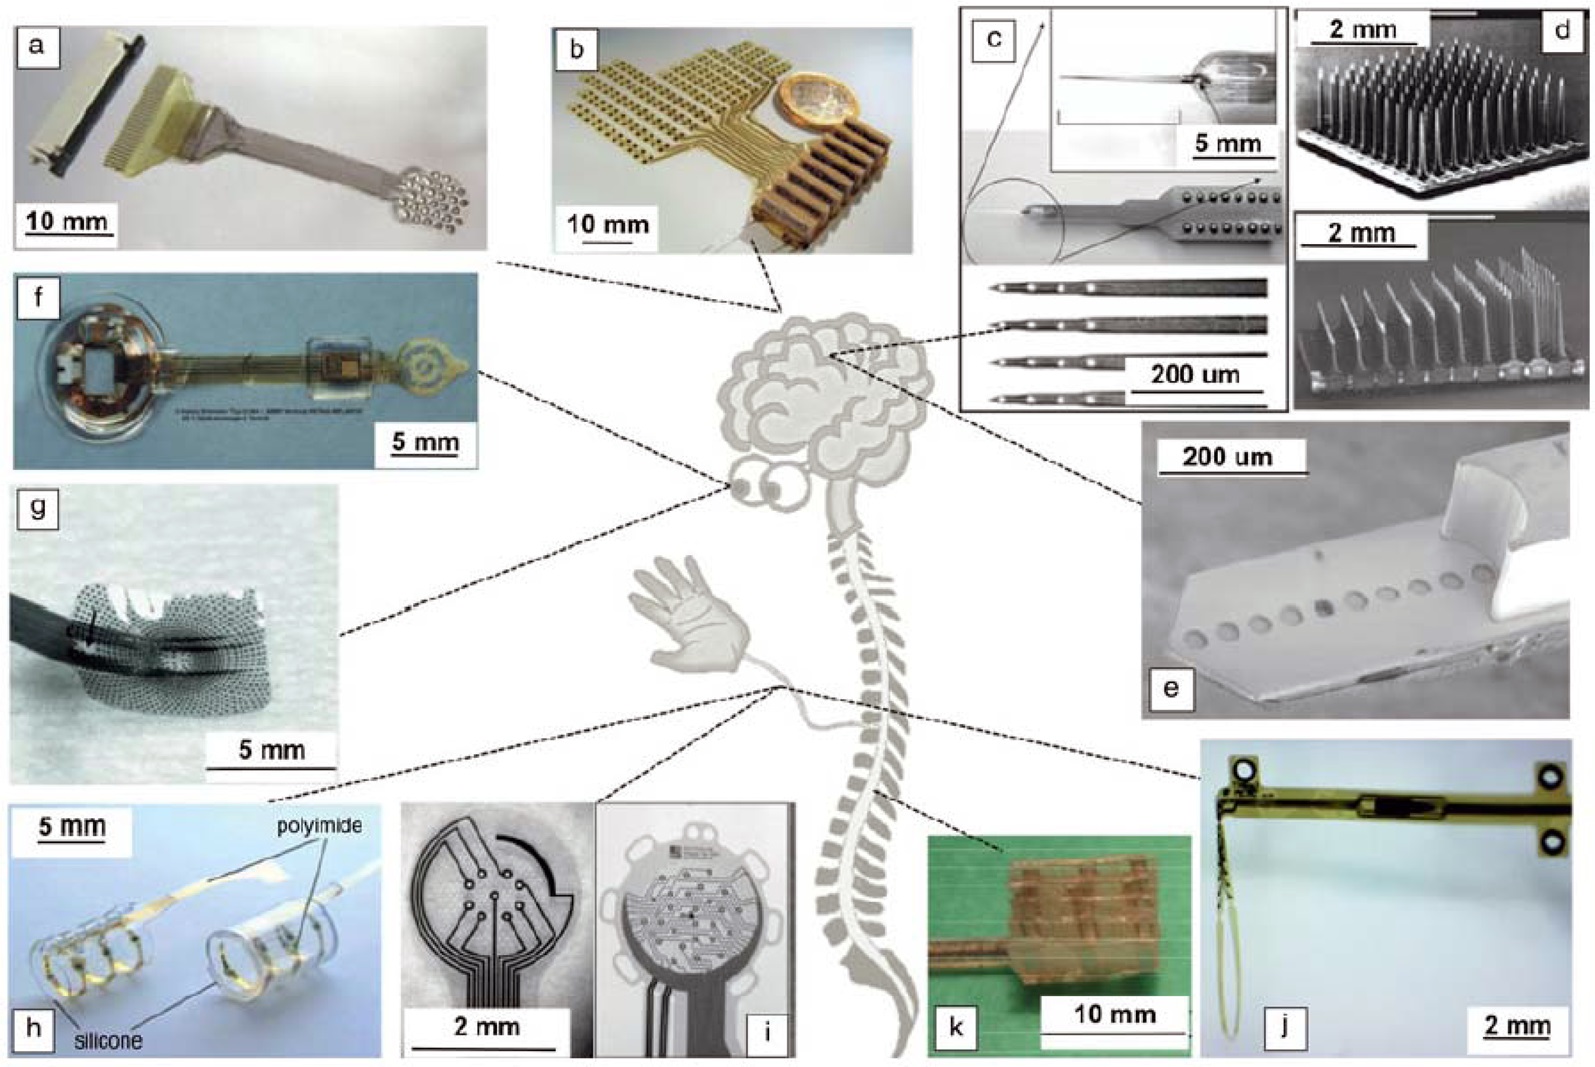 Overview of neural electrode arrays applied to different sections of the nervous system [44].